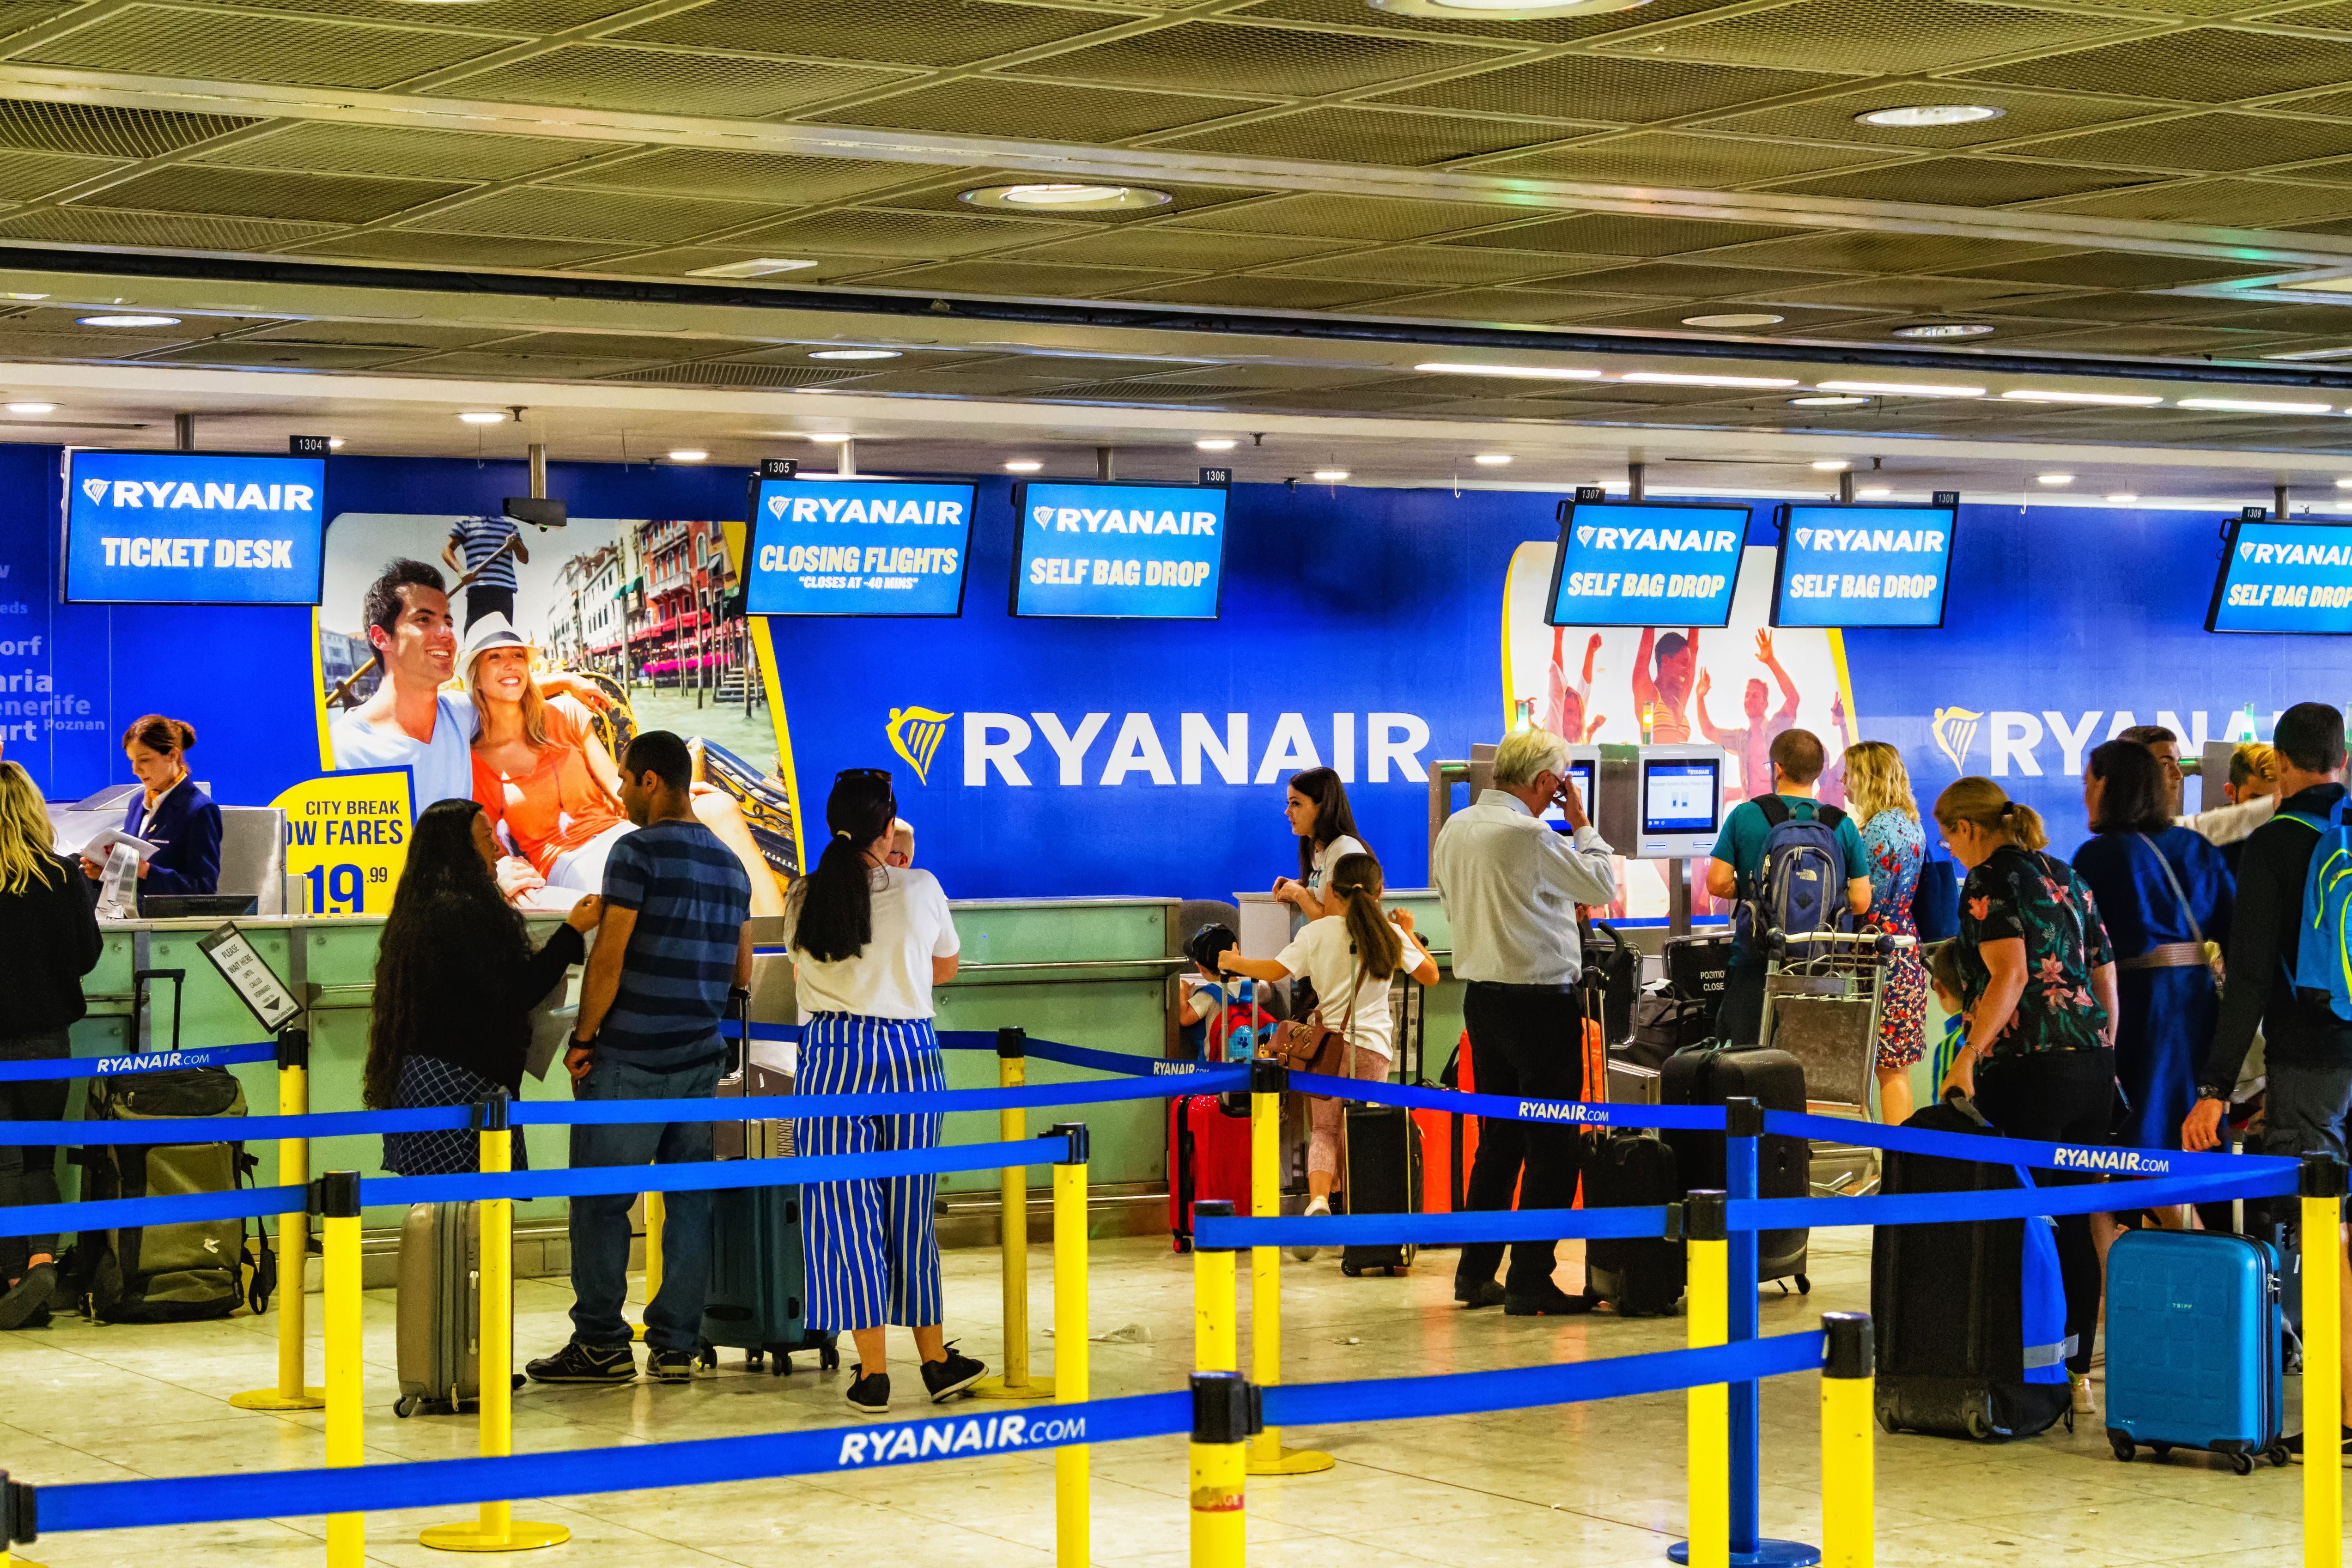 Passengers waiting to check in at Ryanair's check-in desks at Dublin Airport.